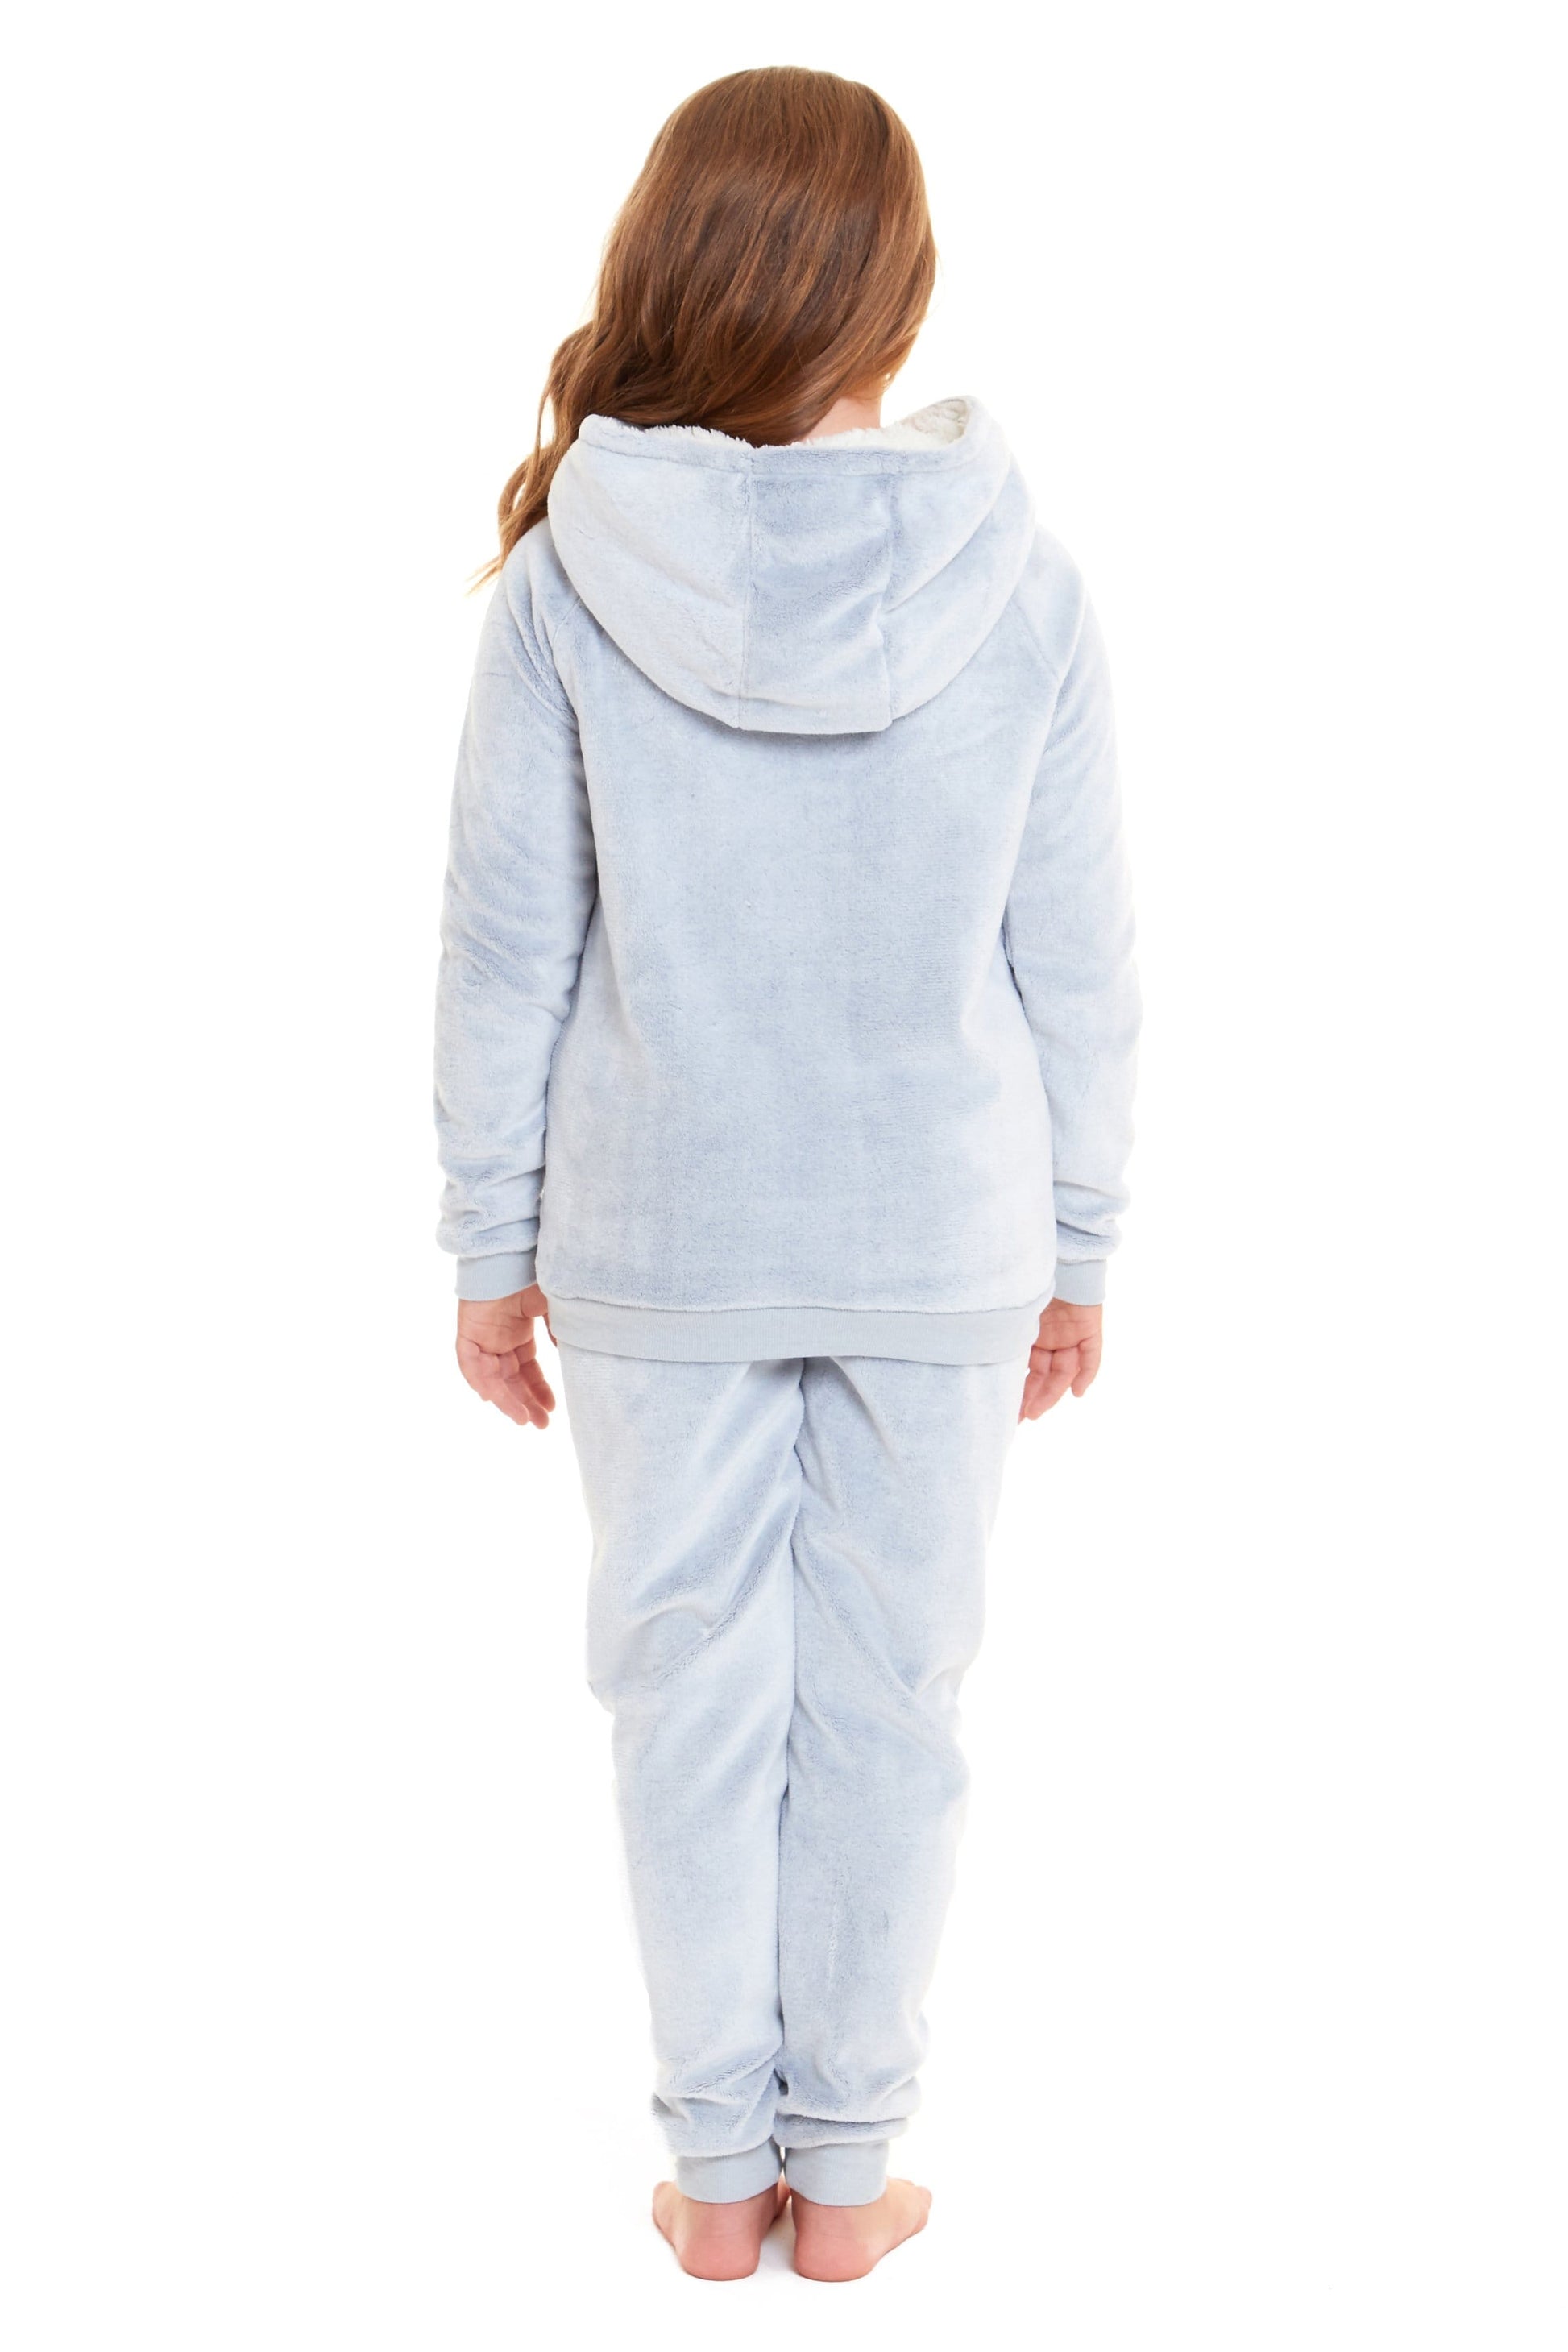 Cuddly Raccoon Plush Fleece Hooded Pyjama Set By OLIVIA ROCCO, Soft &  Comfortable, Boutique Nightwear, Fluffy Loungewear, Cosy Everyday PJs, The  Perfect Mother & Daughter Gift Idea